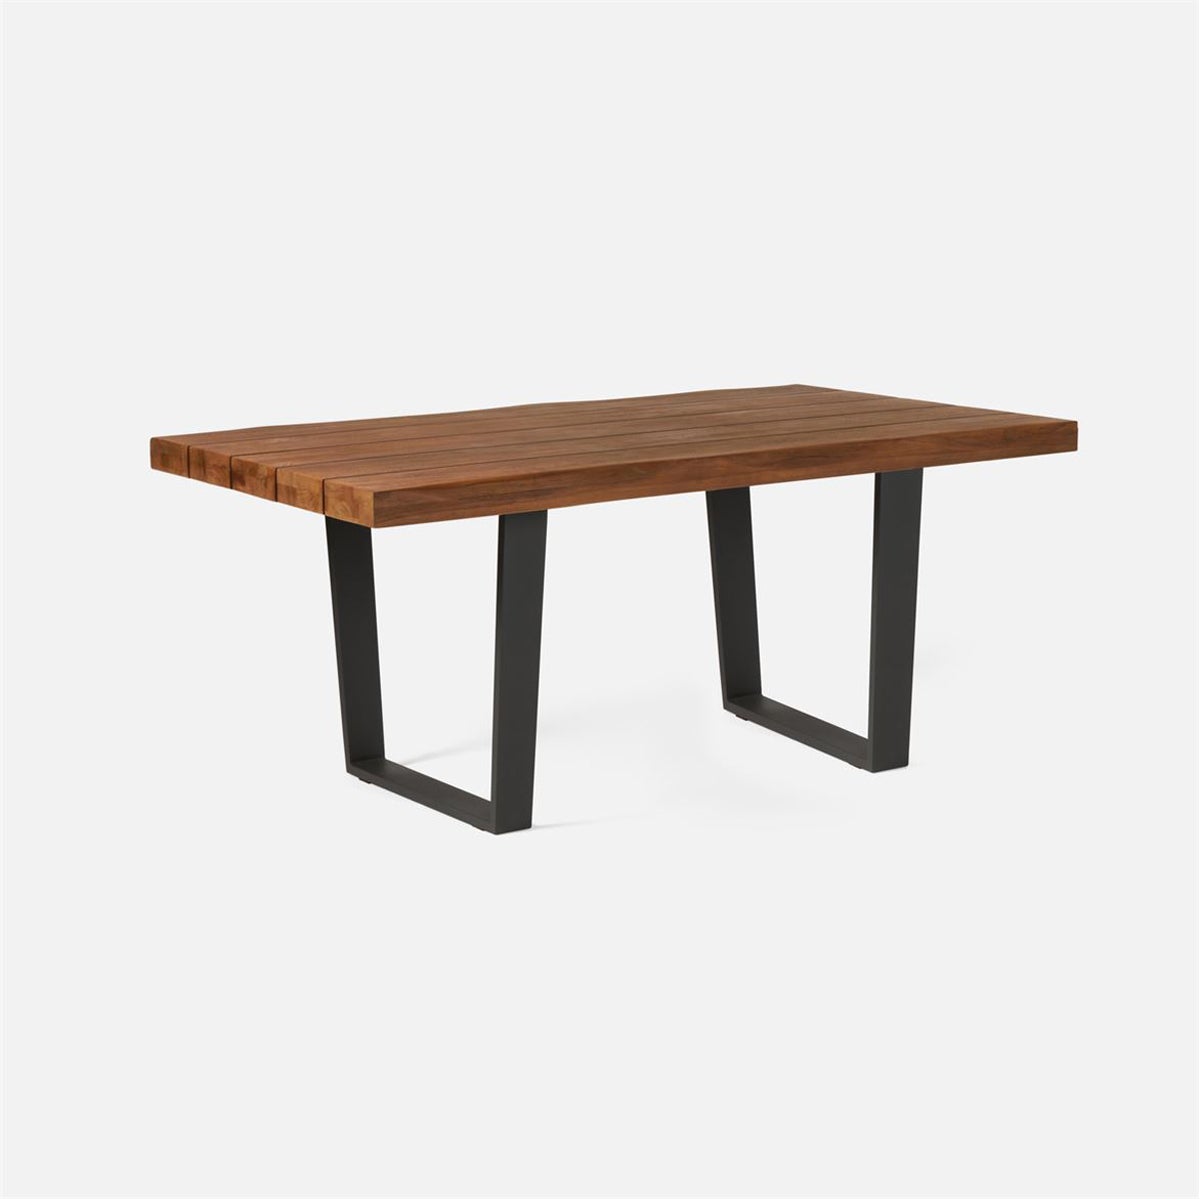 Made Goods Brandt Modern Aged Teak and Aluminum Outdoor Dining Table